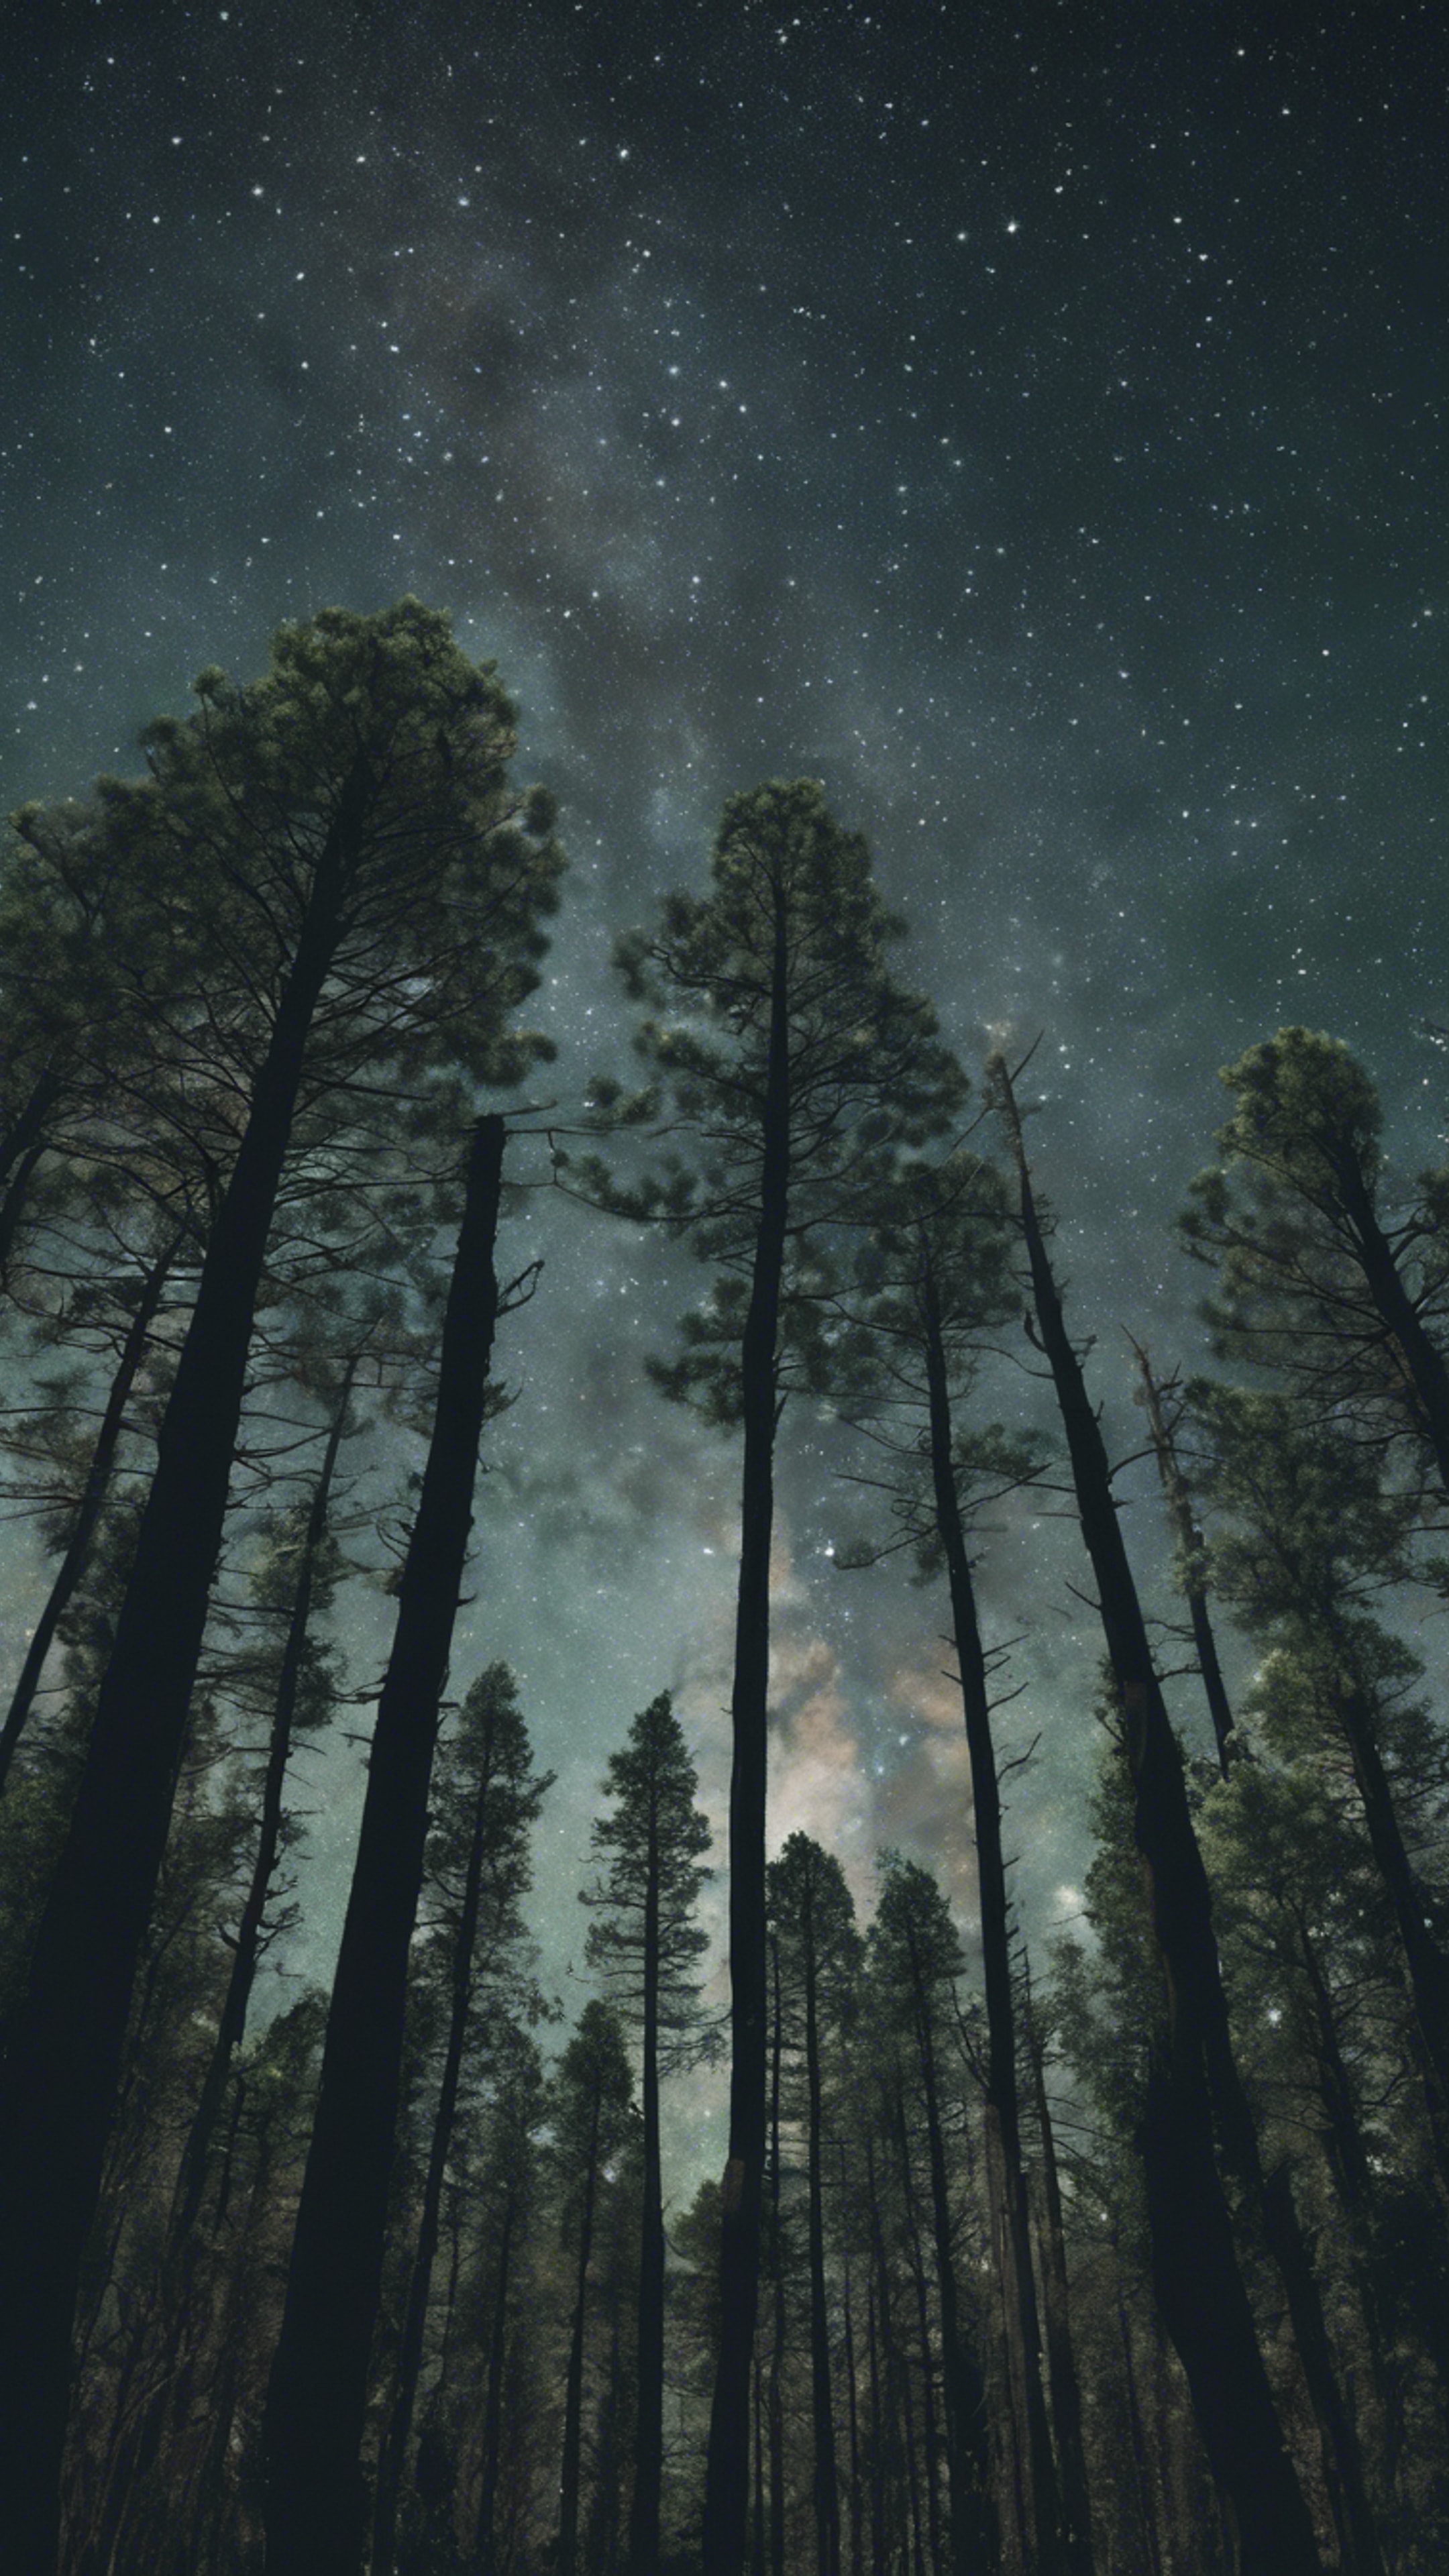 A wilderness scene with tall, dark green pine trees occluding the stars. Hintergrund[a450718e497a48169b60]